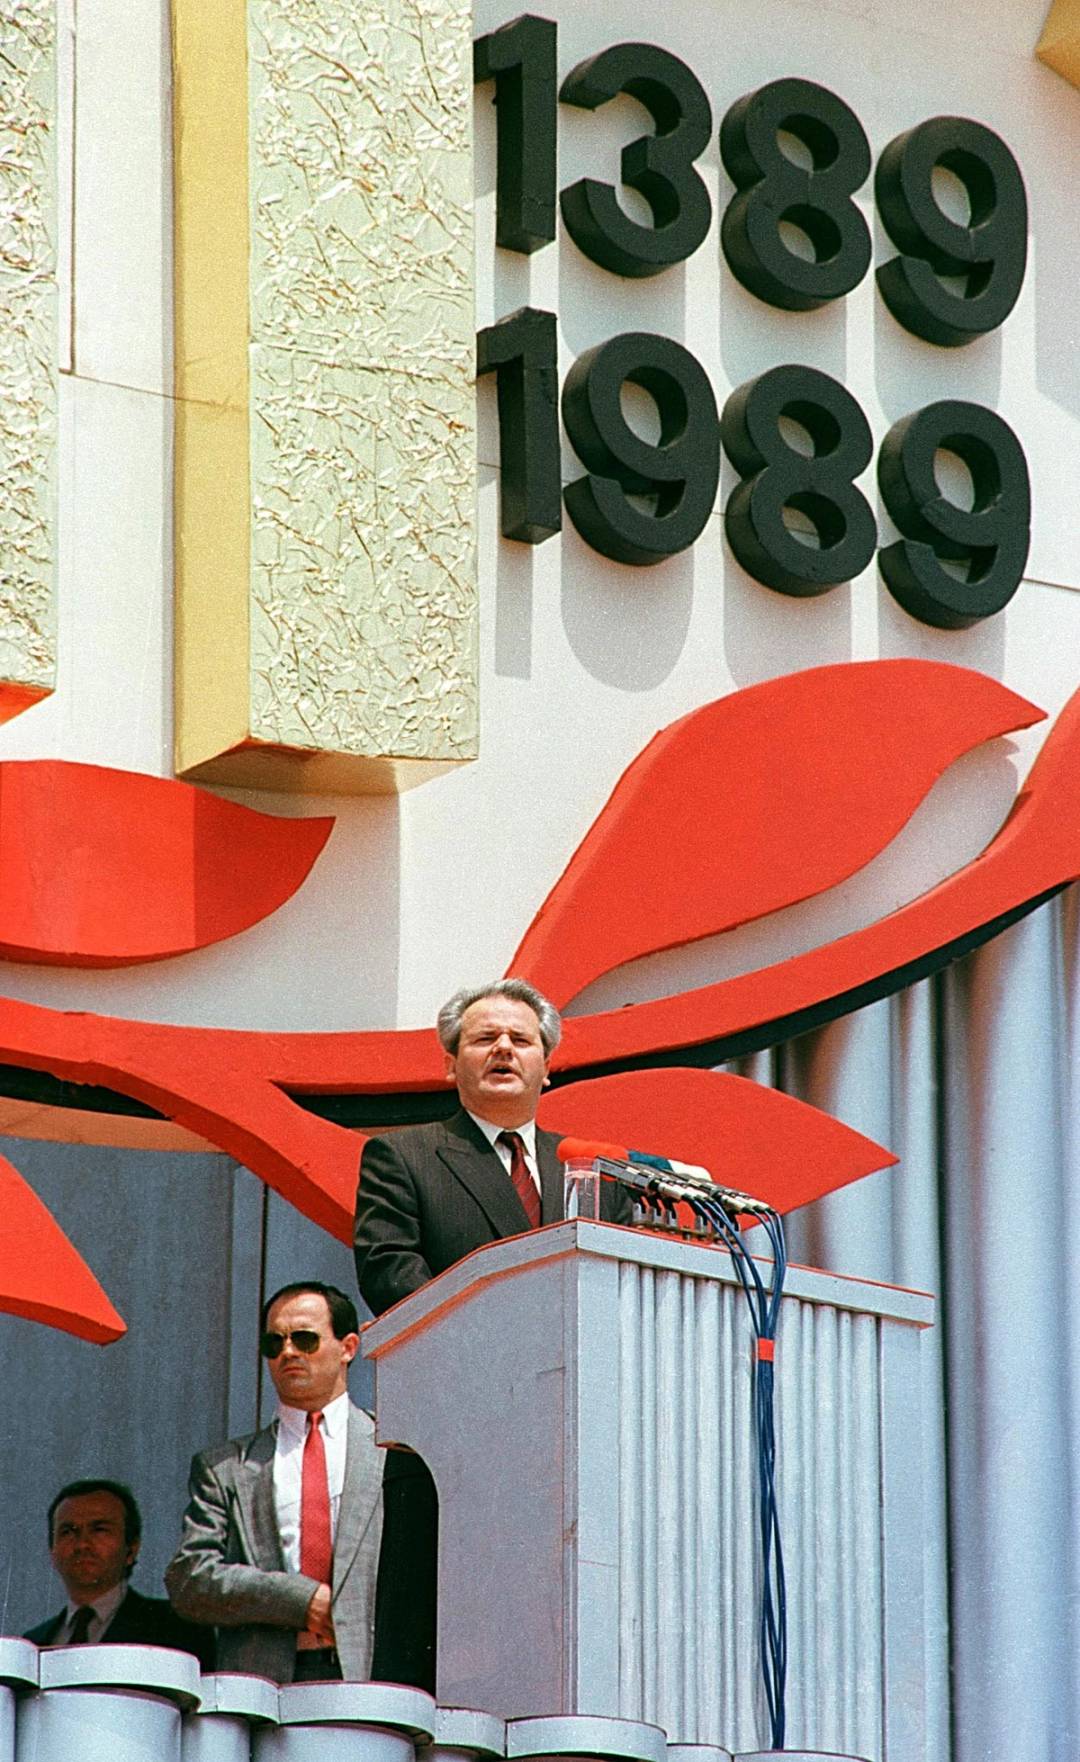 Slobodan Milošević addresses Serbs at Gazimestan, the field in Kosovo where Serbs lost the Battle of Kosovo to the Turks in 1389. The speech was part of a daylong event to mark the 600th anniversary of the battle, June 28, 1989